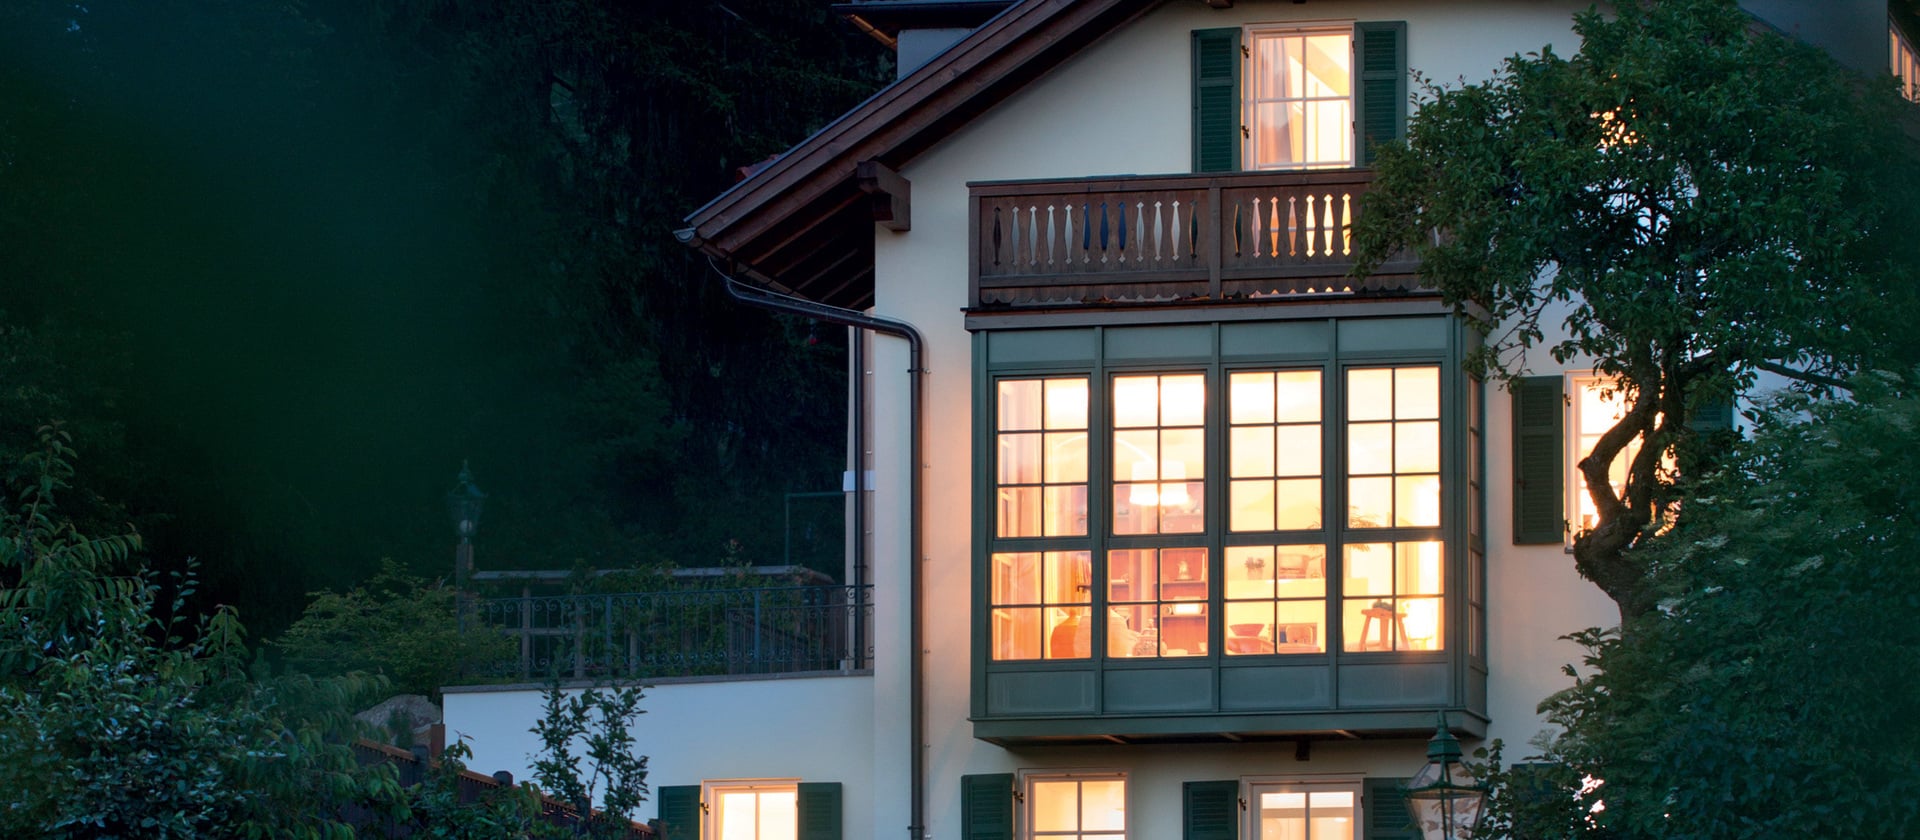 Private residence on the Ritten